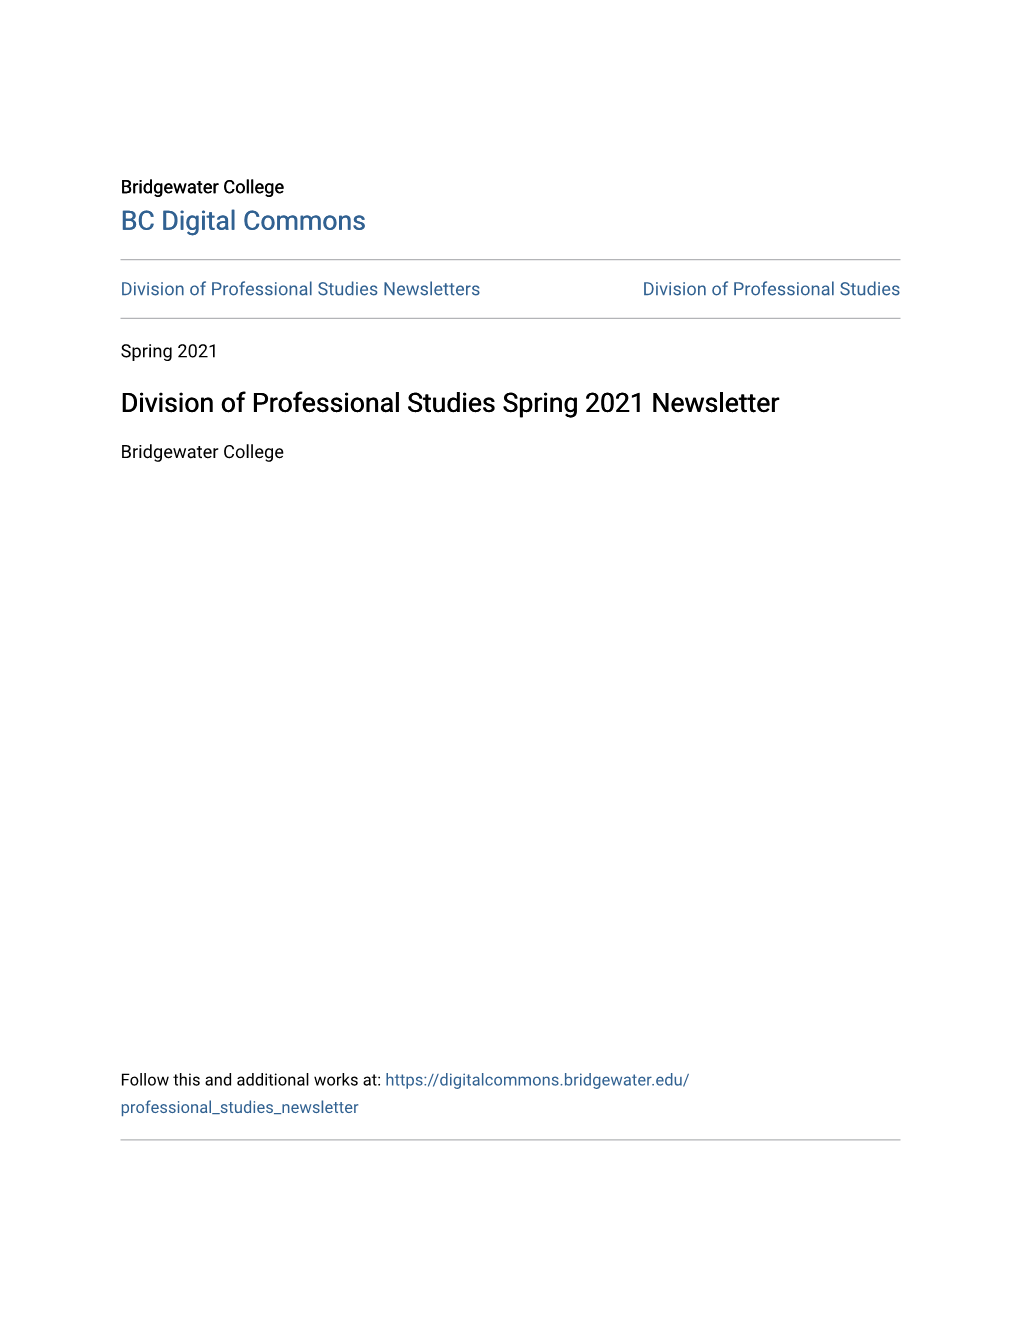 Division of Professional Studies Spring 2021 Newsletter